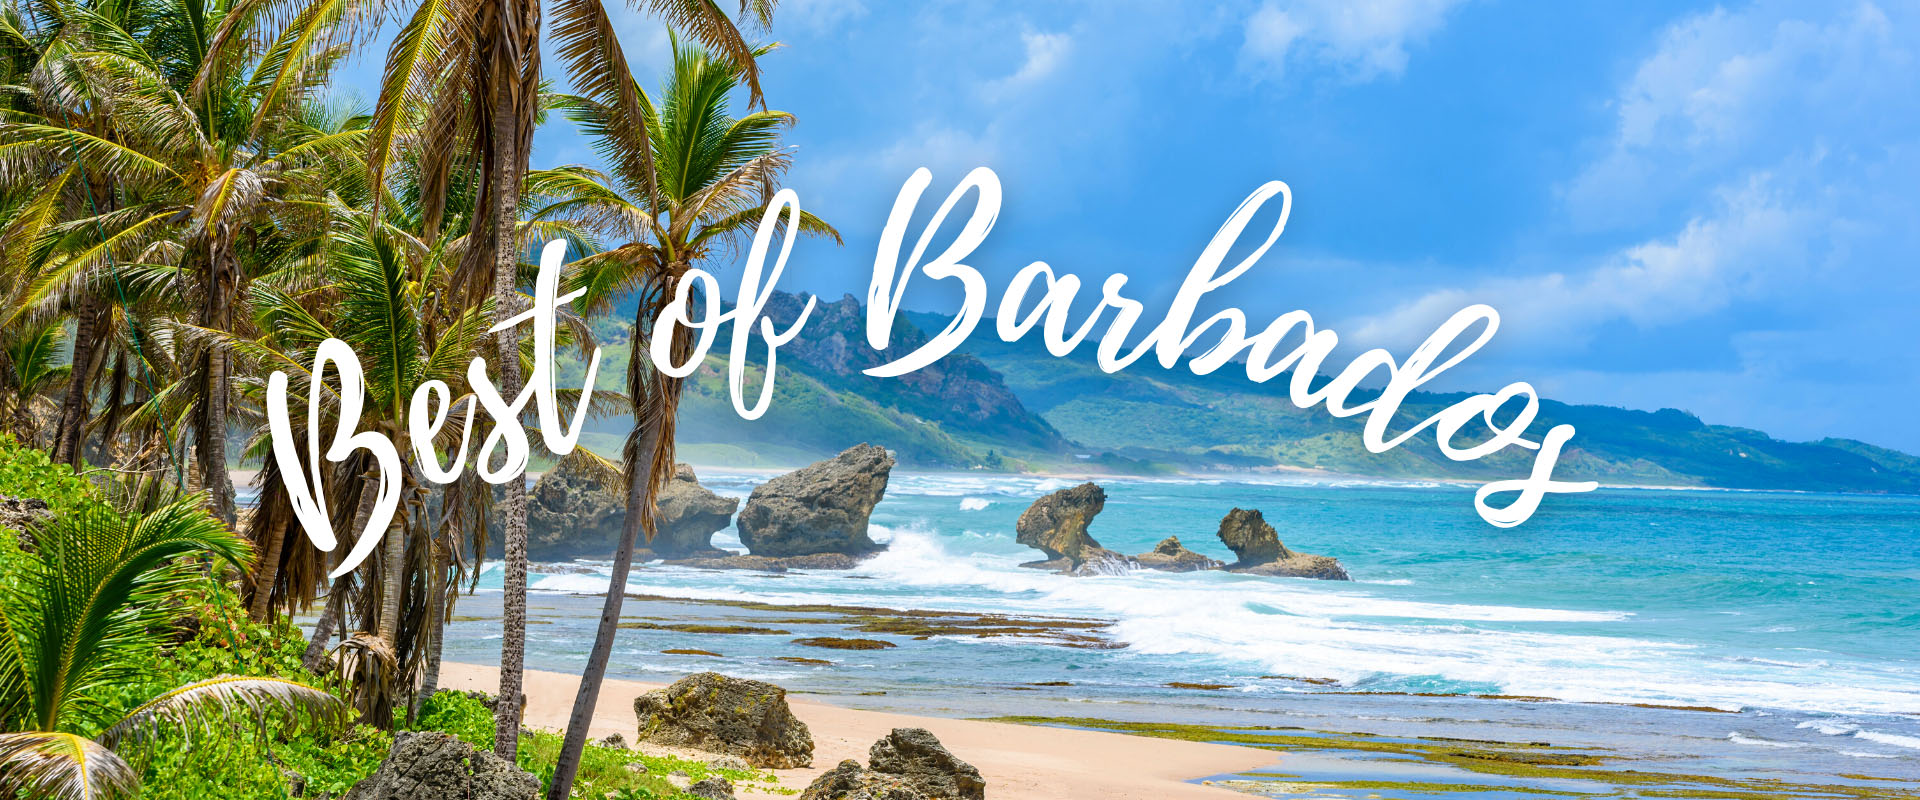 Best of Barbados Guide